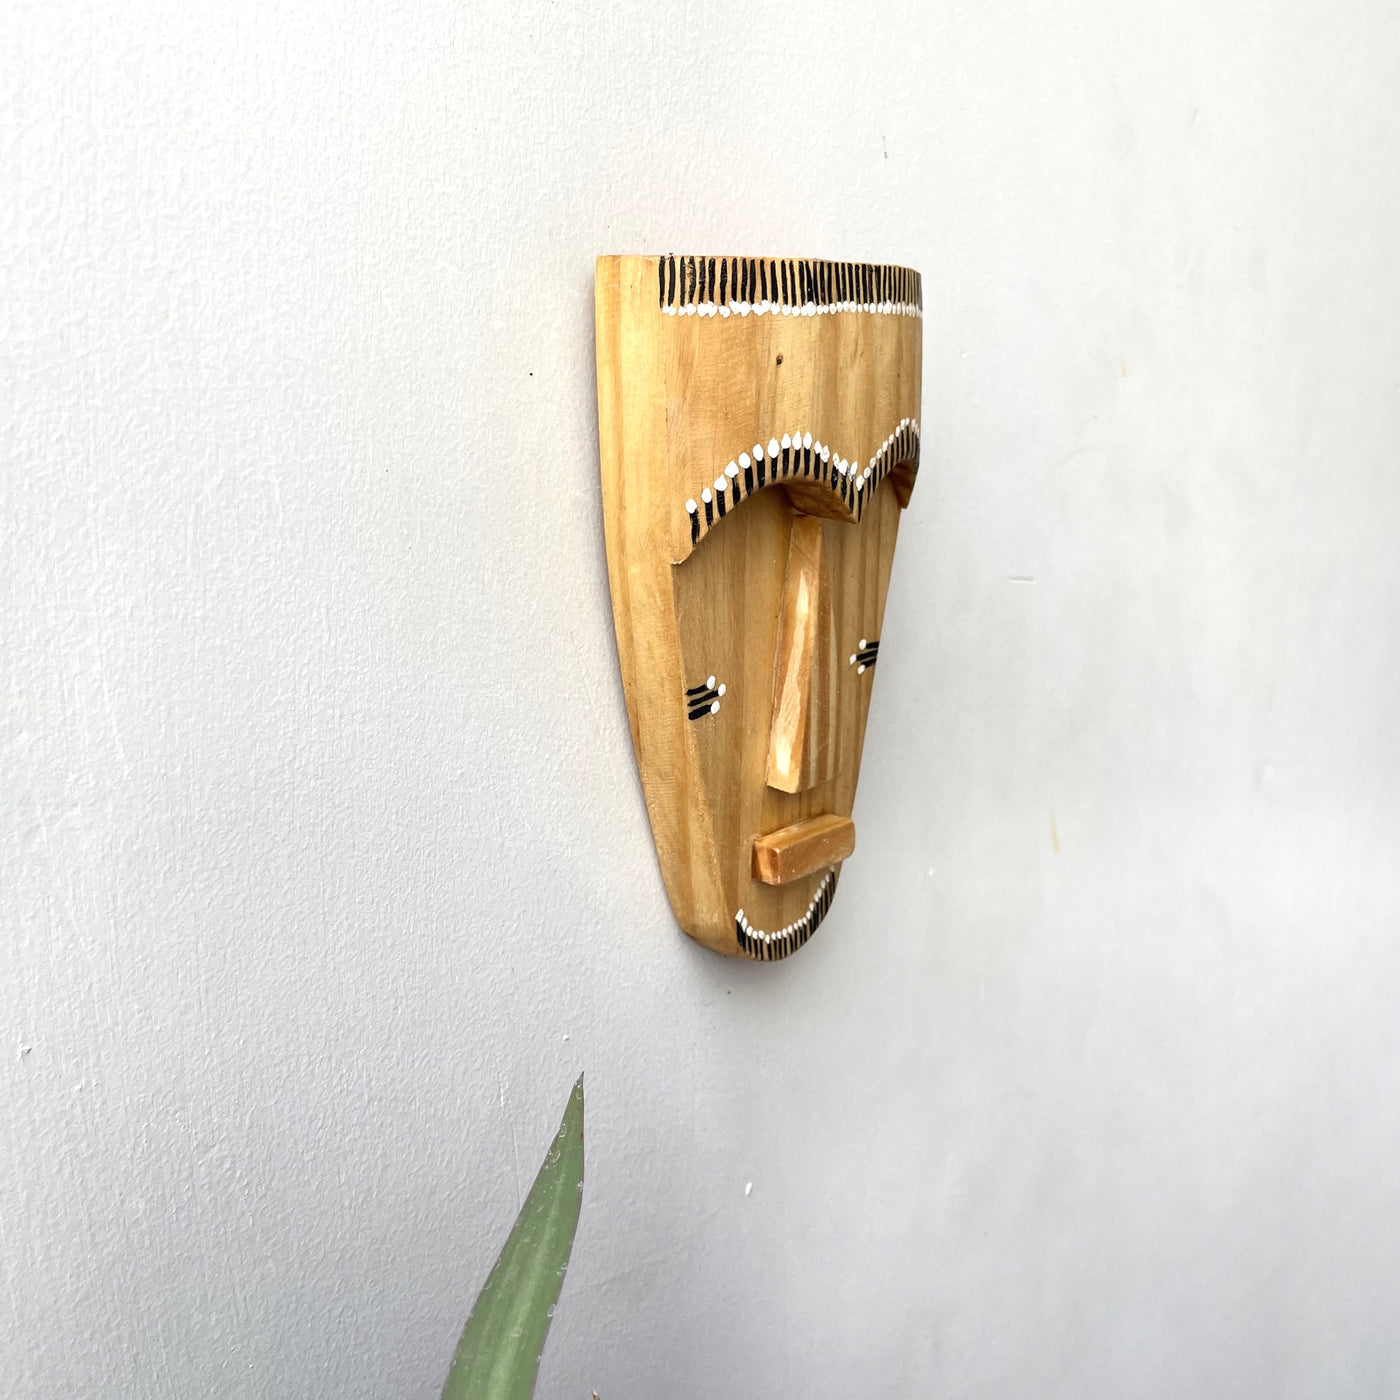 Wooden tribal abstract man small mask